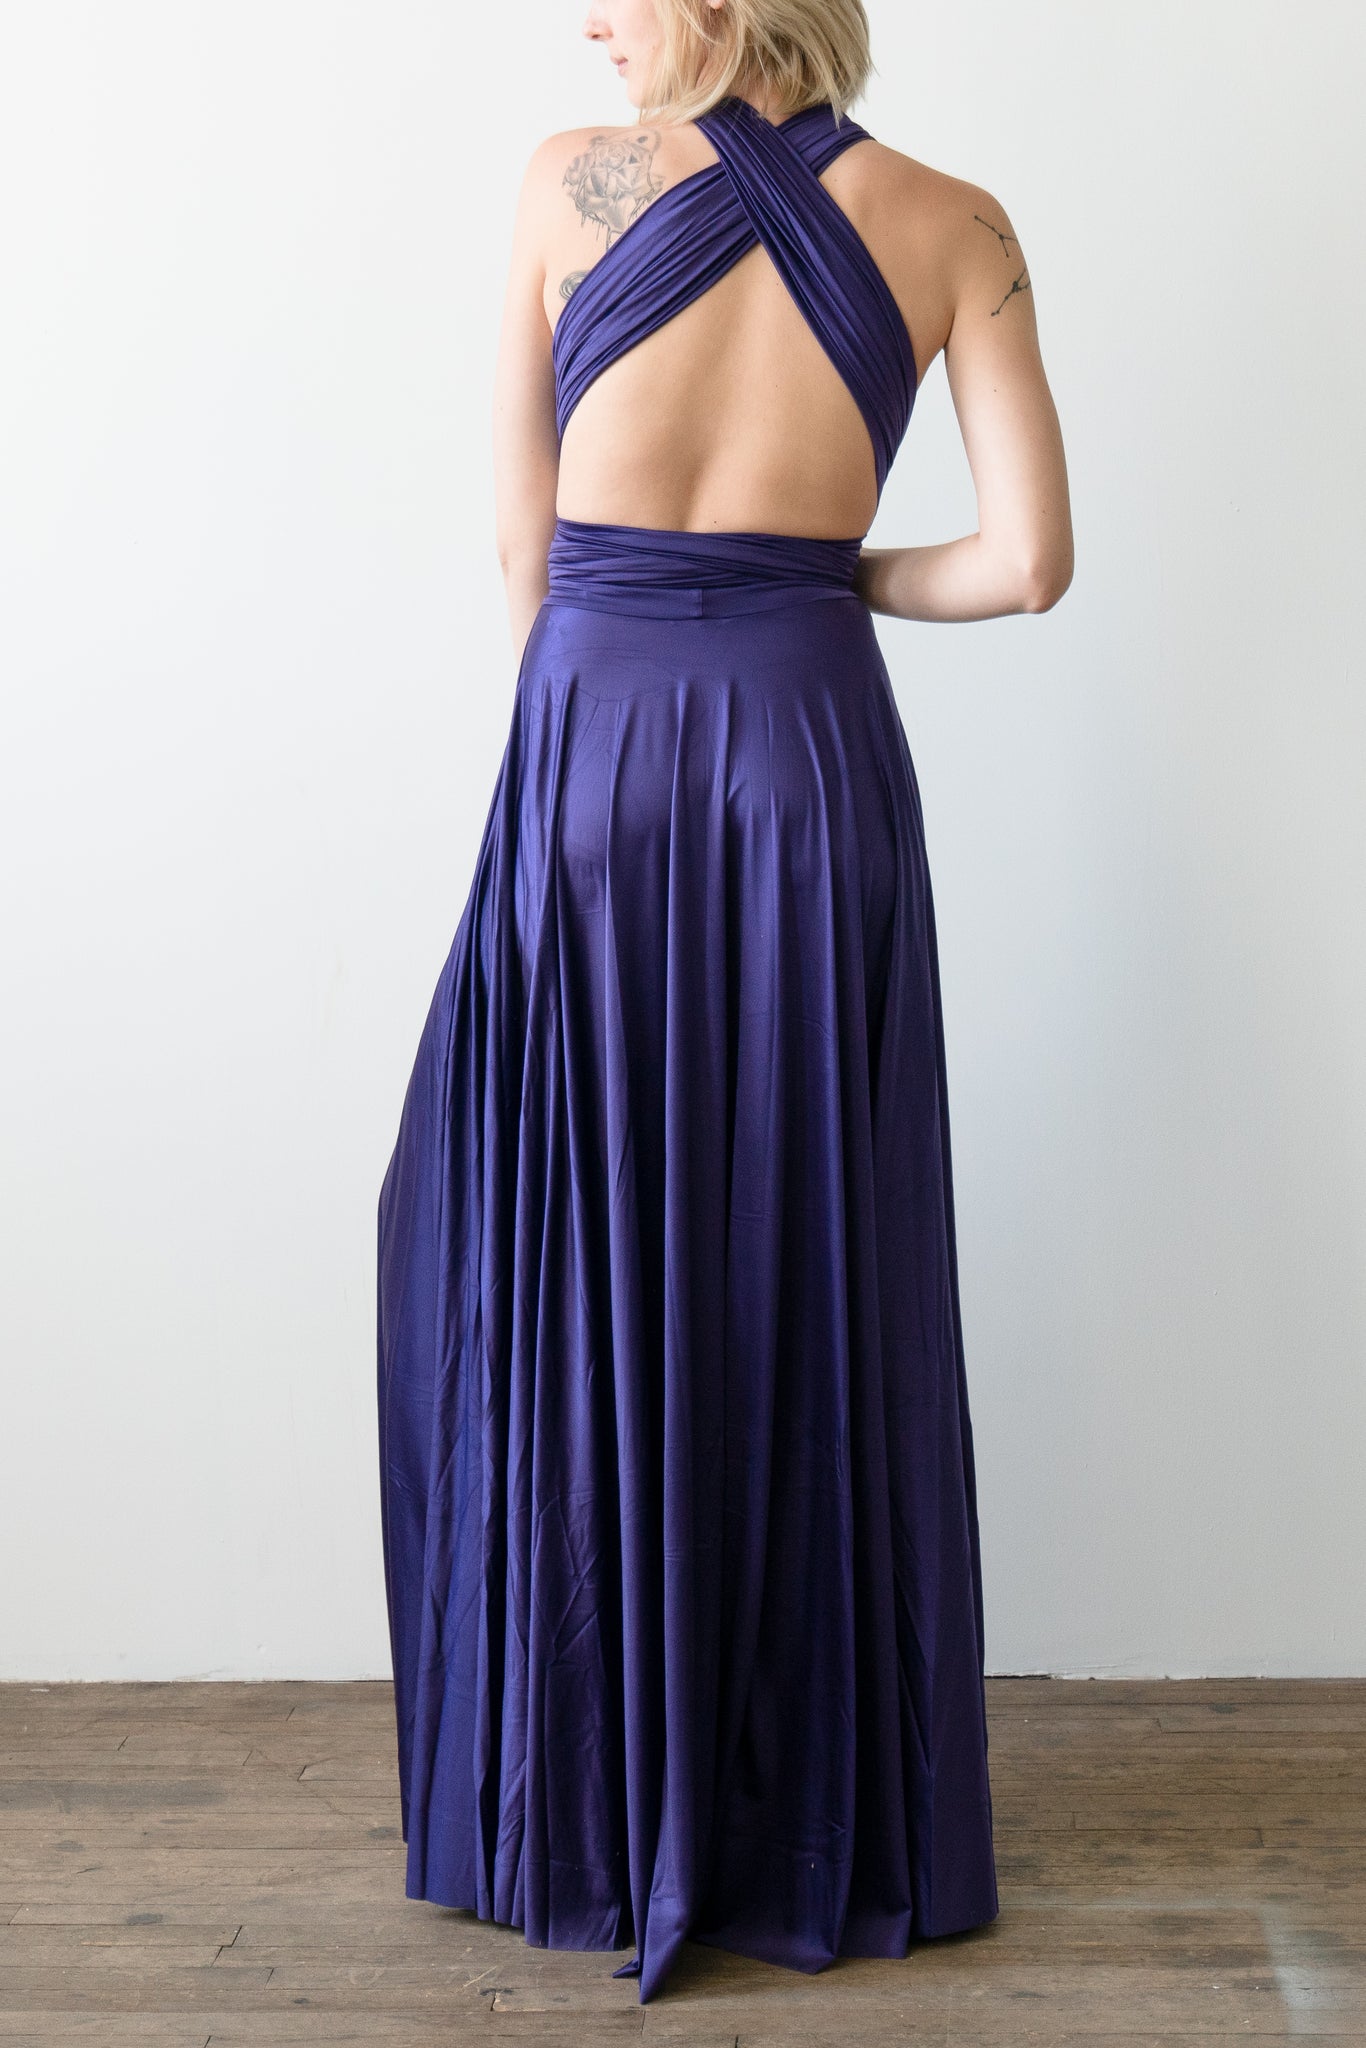 Exclusive Satin Ball Gown Skirt – Nadia Tarr Rare Archive Sale